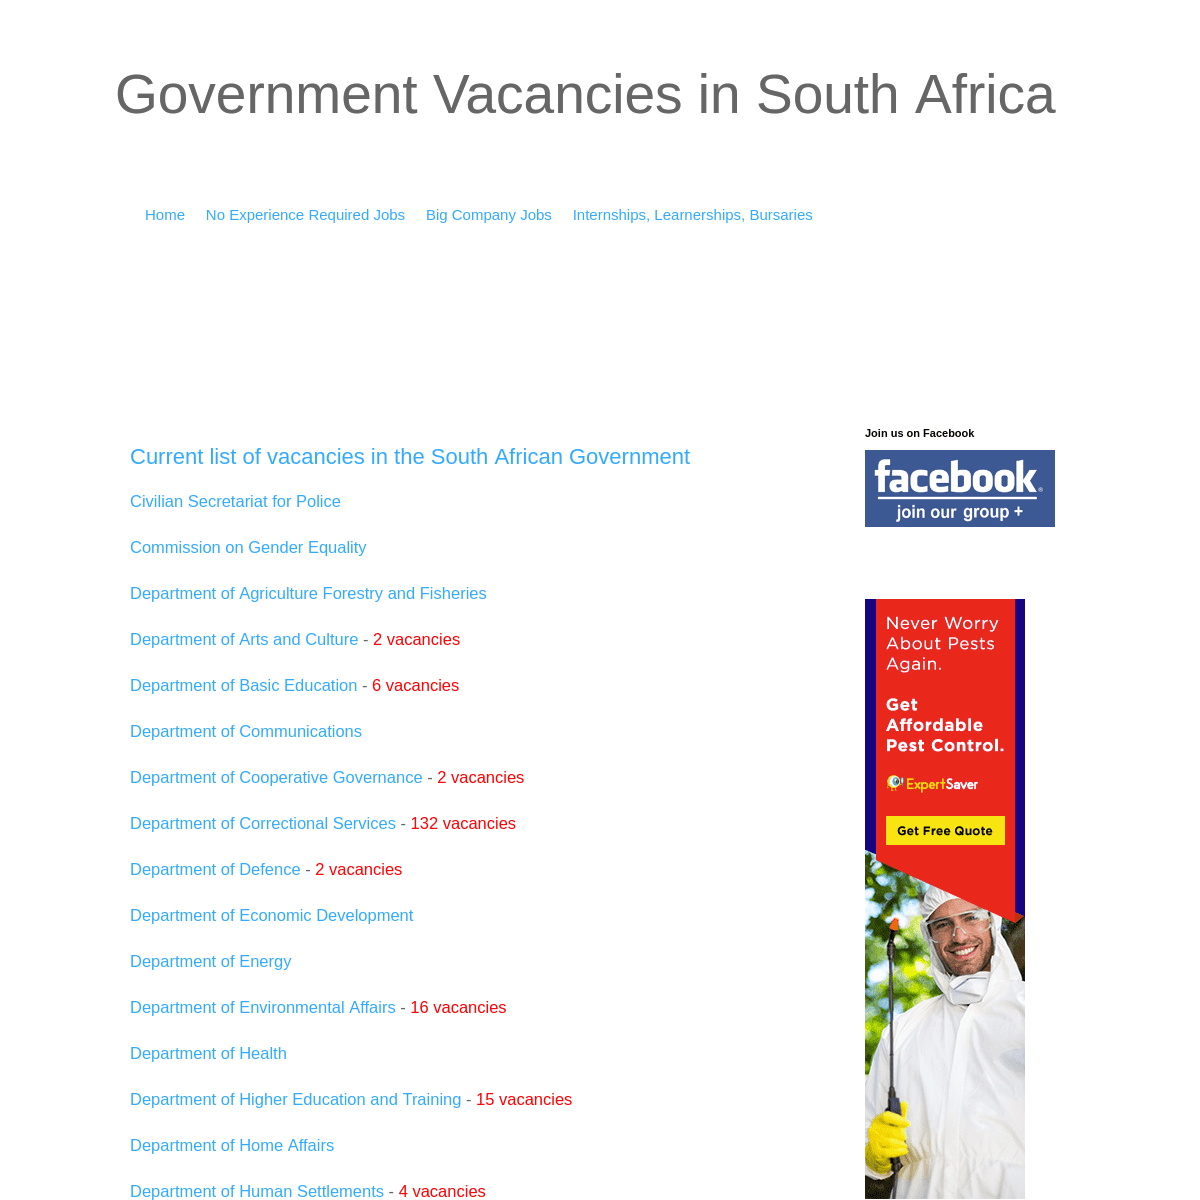 A complete backup of government-vacancies-in-south-africa.blogspot.com